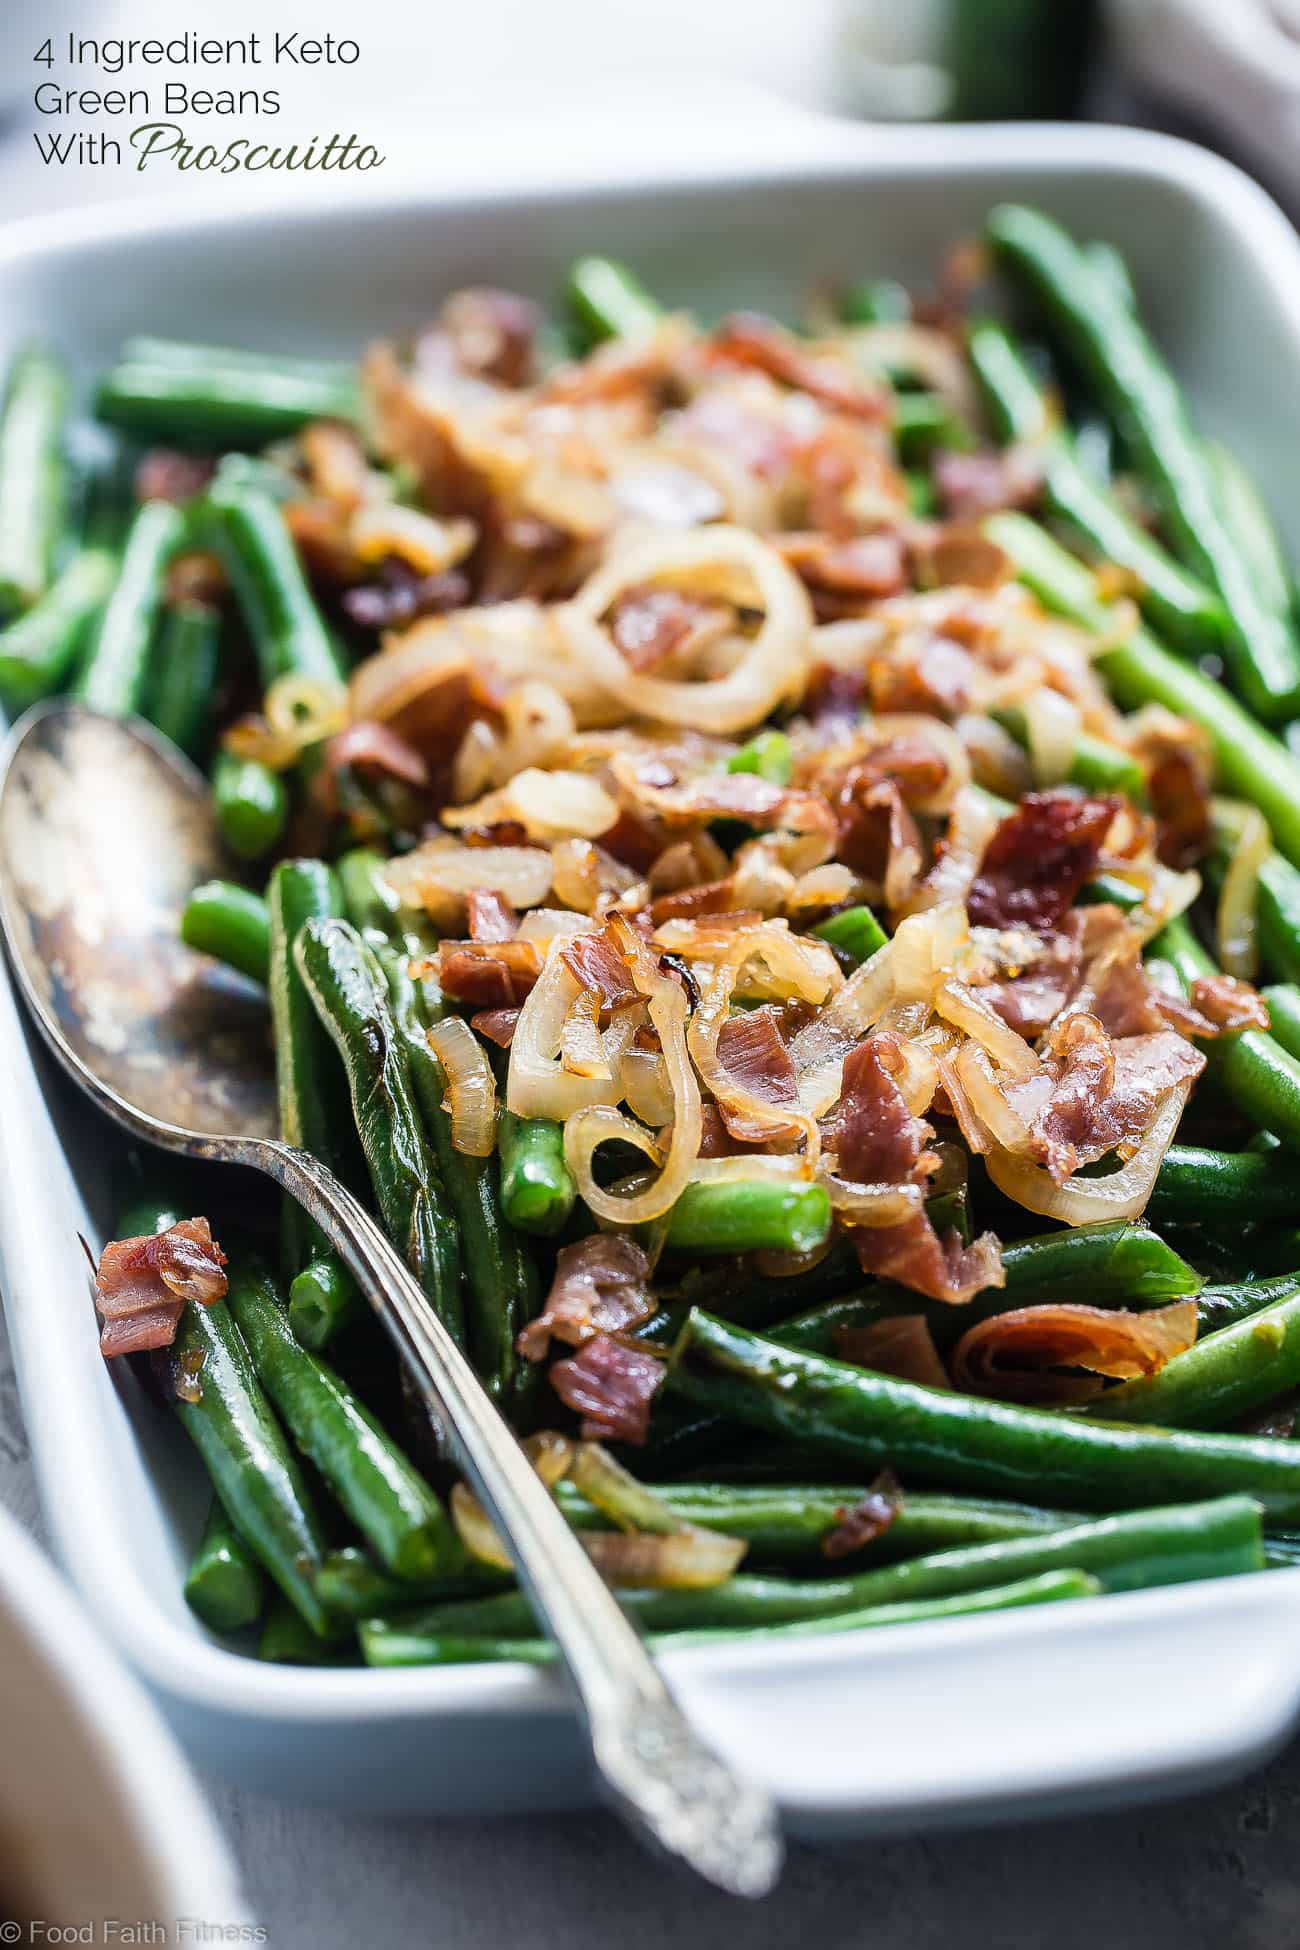 Keto Sauteed Green Beans with Crispy Prosciutto - This easy sautéed fresh green beans recipe comes together in only 15 minutes! It's only 4 ingredients, paleo friendly and 100 calories! | Foodfaithfitness.com | @FoodFaithFit